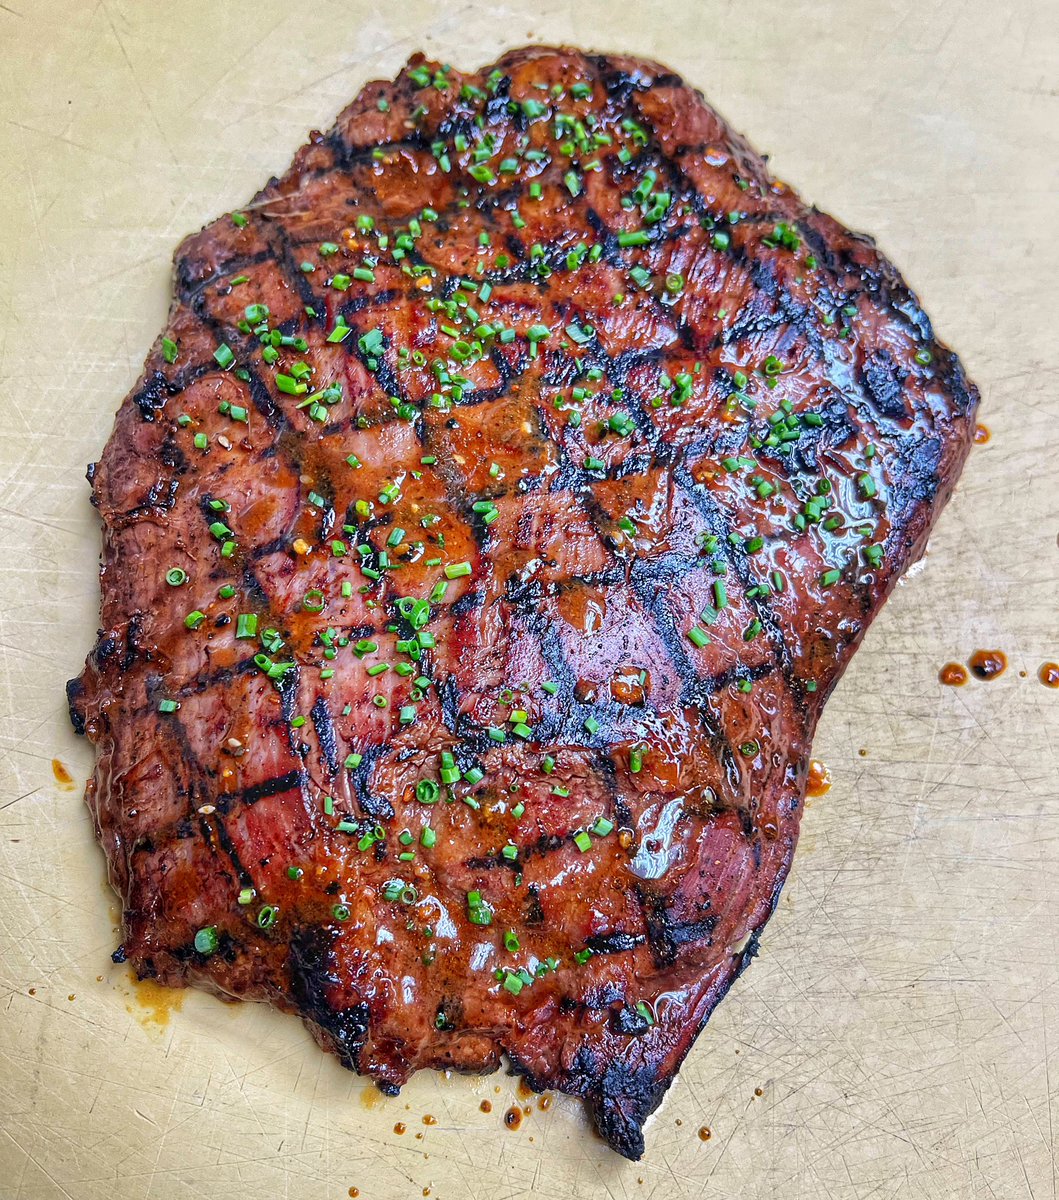 Every season I get asked about the gas vs. charcoal grill debate. Here is my short answer: For quick high-heat cooking, gas grill is great. Think Flank Steak, Strips, Rib Eye, Hanger, Mock Tender, etc. For longer, slower cooking, the charcoal grill is the way to go - Brisket,